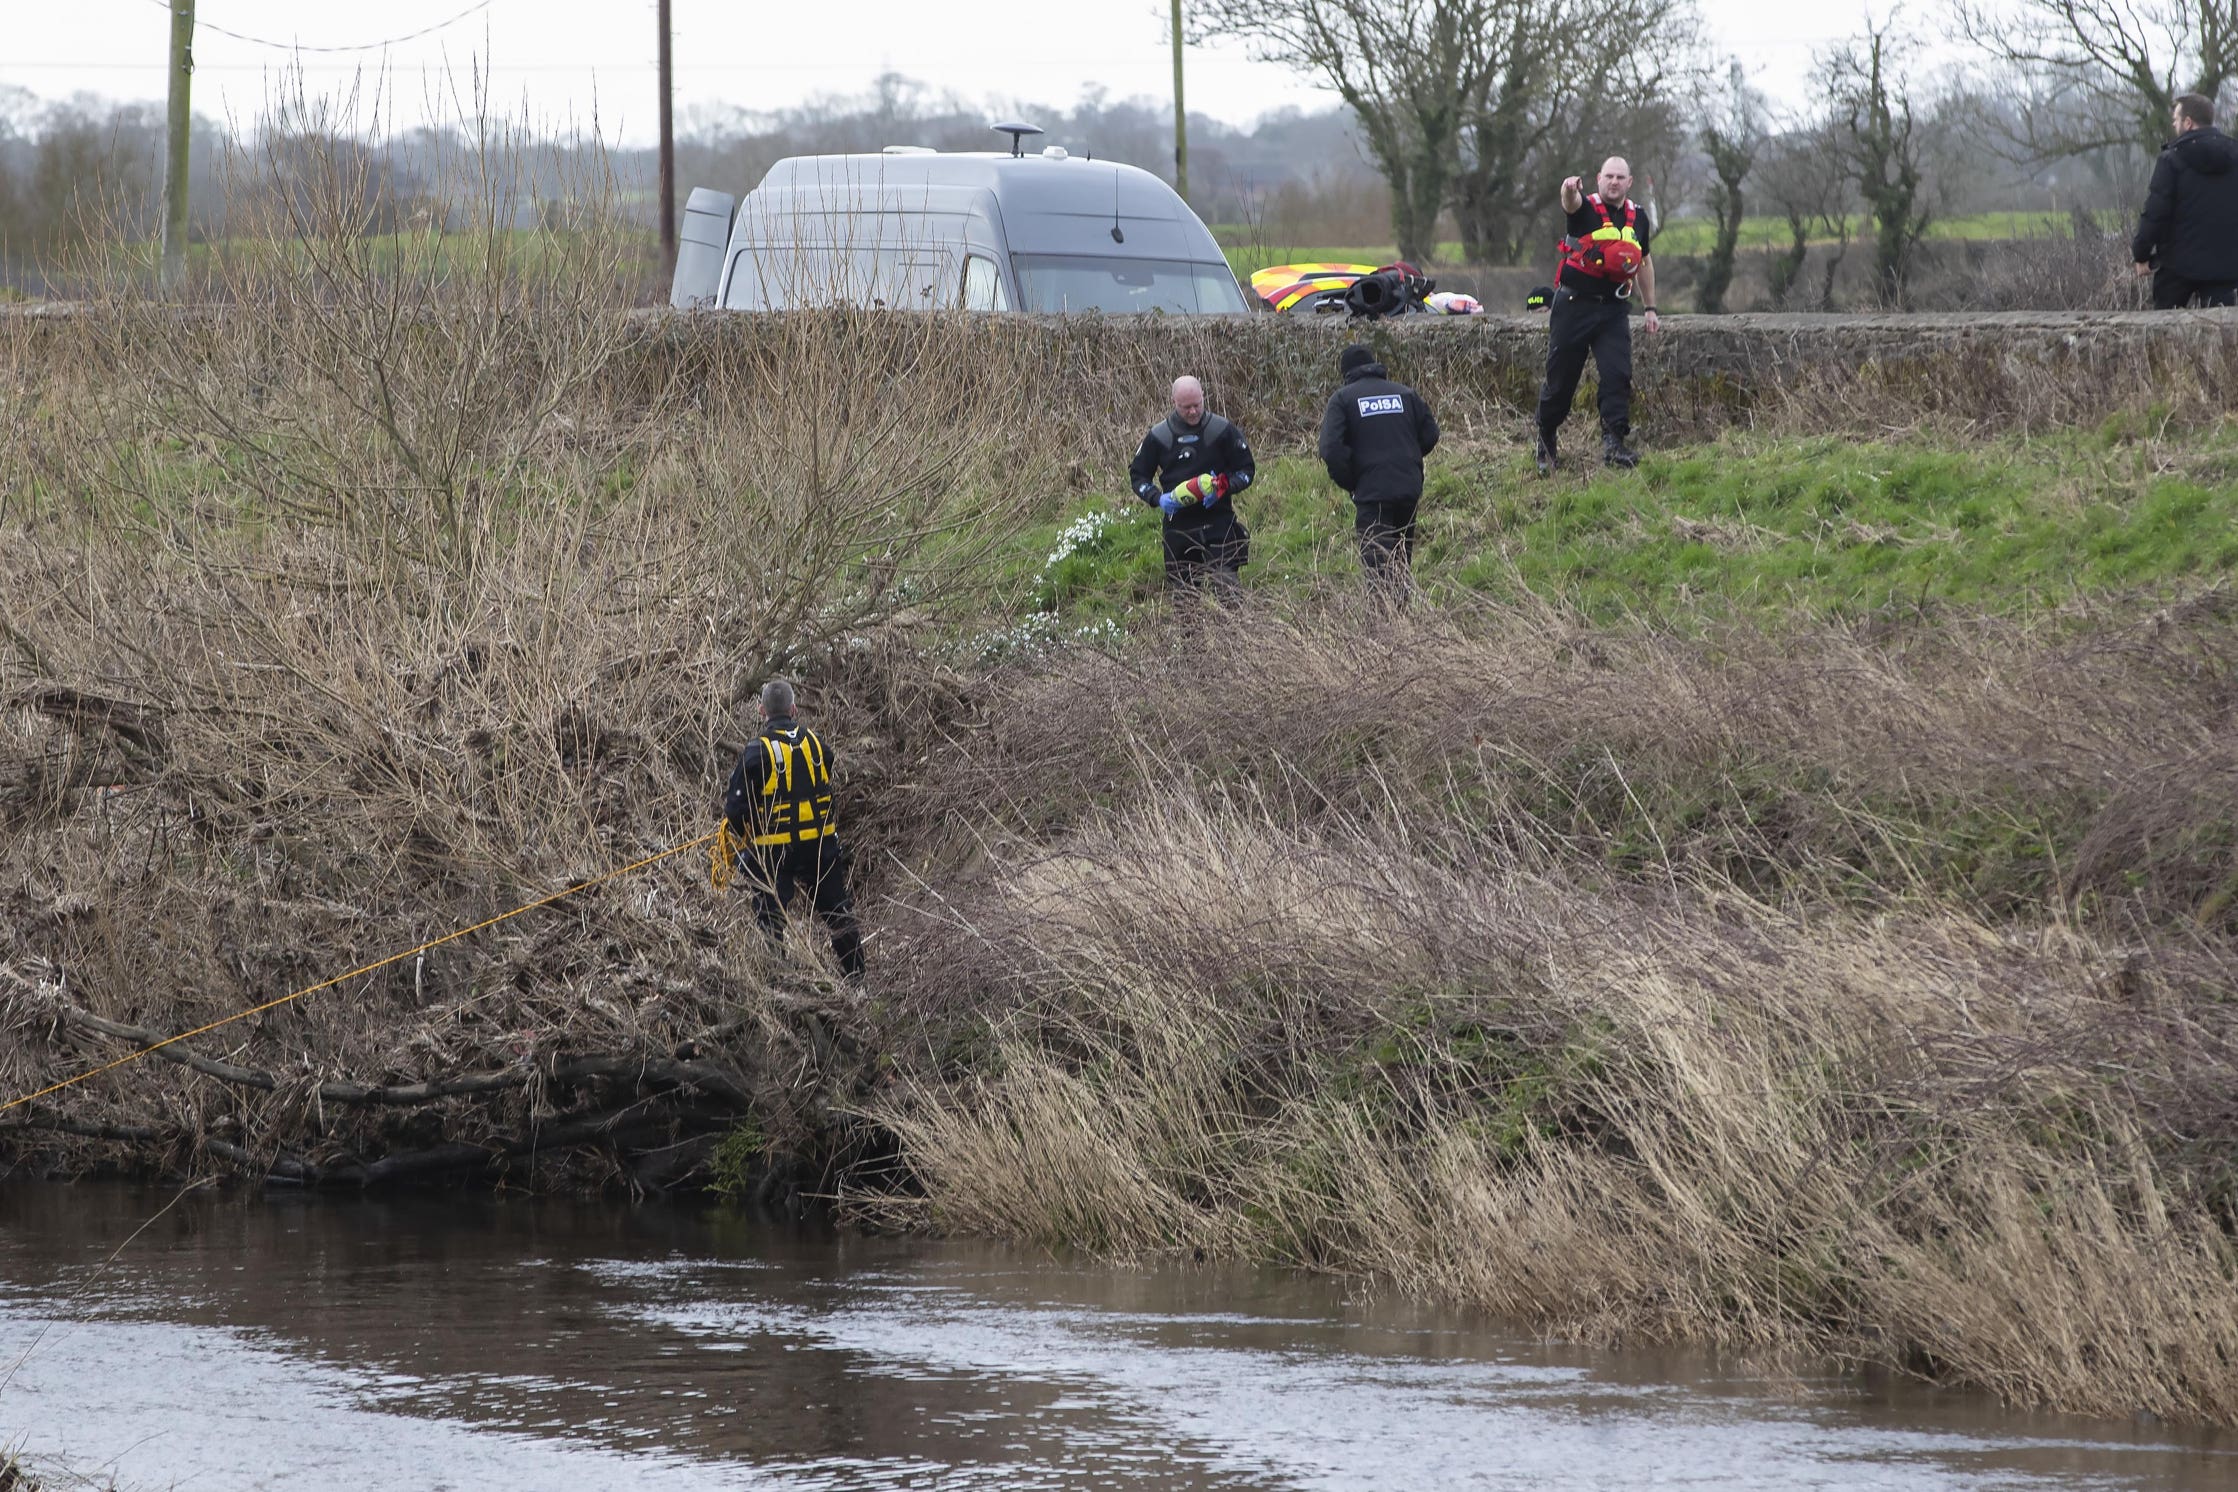 A police diving team at the River Wyre in the search for Ms Bulley